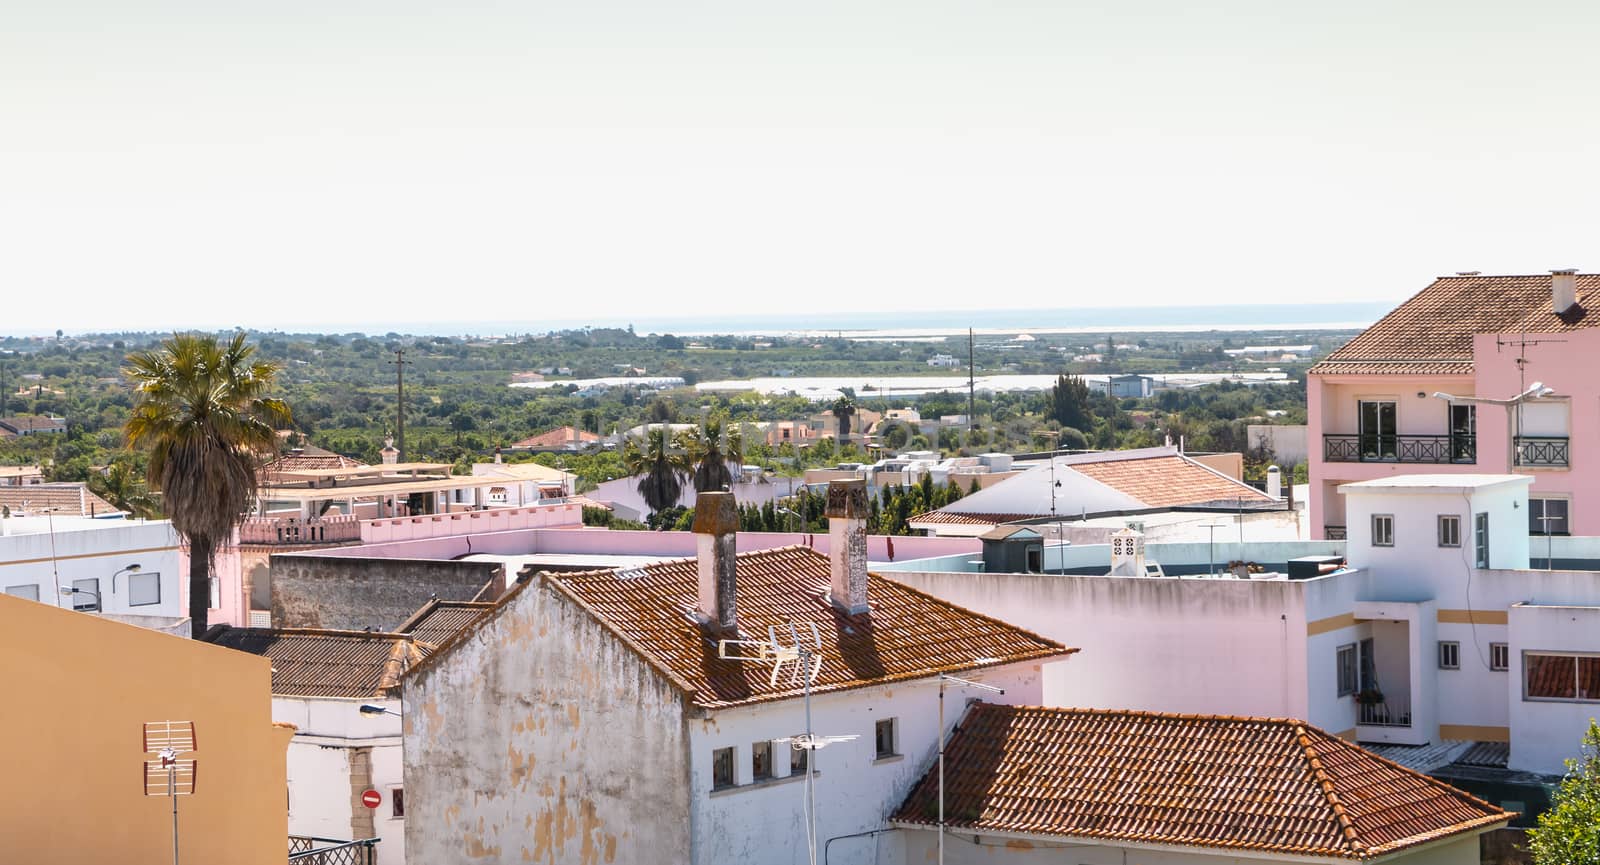 view over the roofs of houses with typical architecture of monca by AtlanticEUROSTOXX